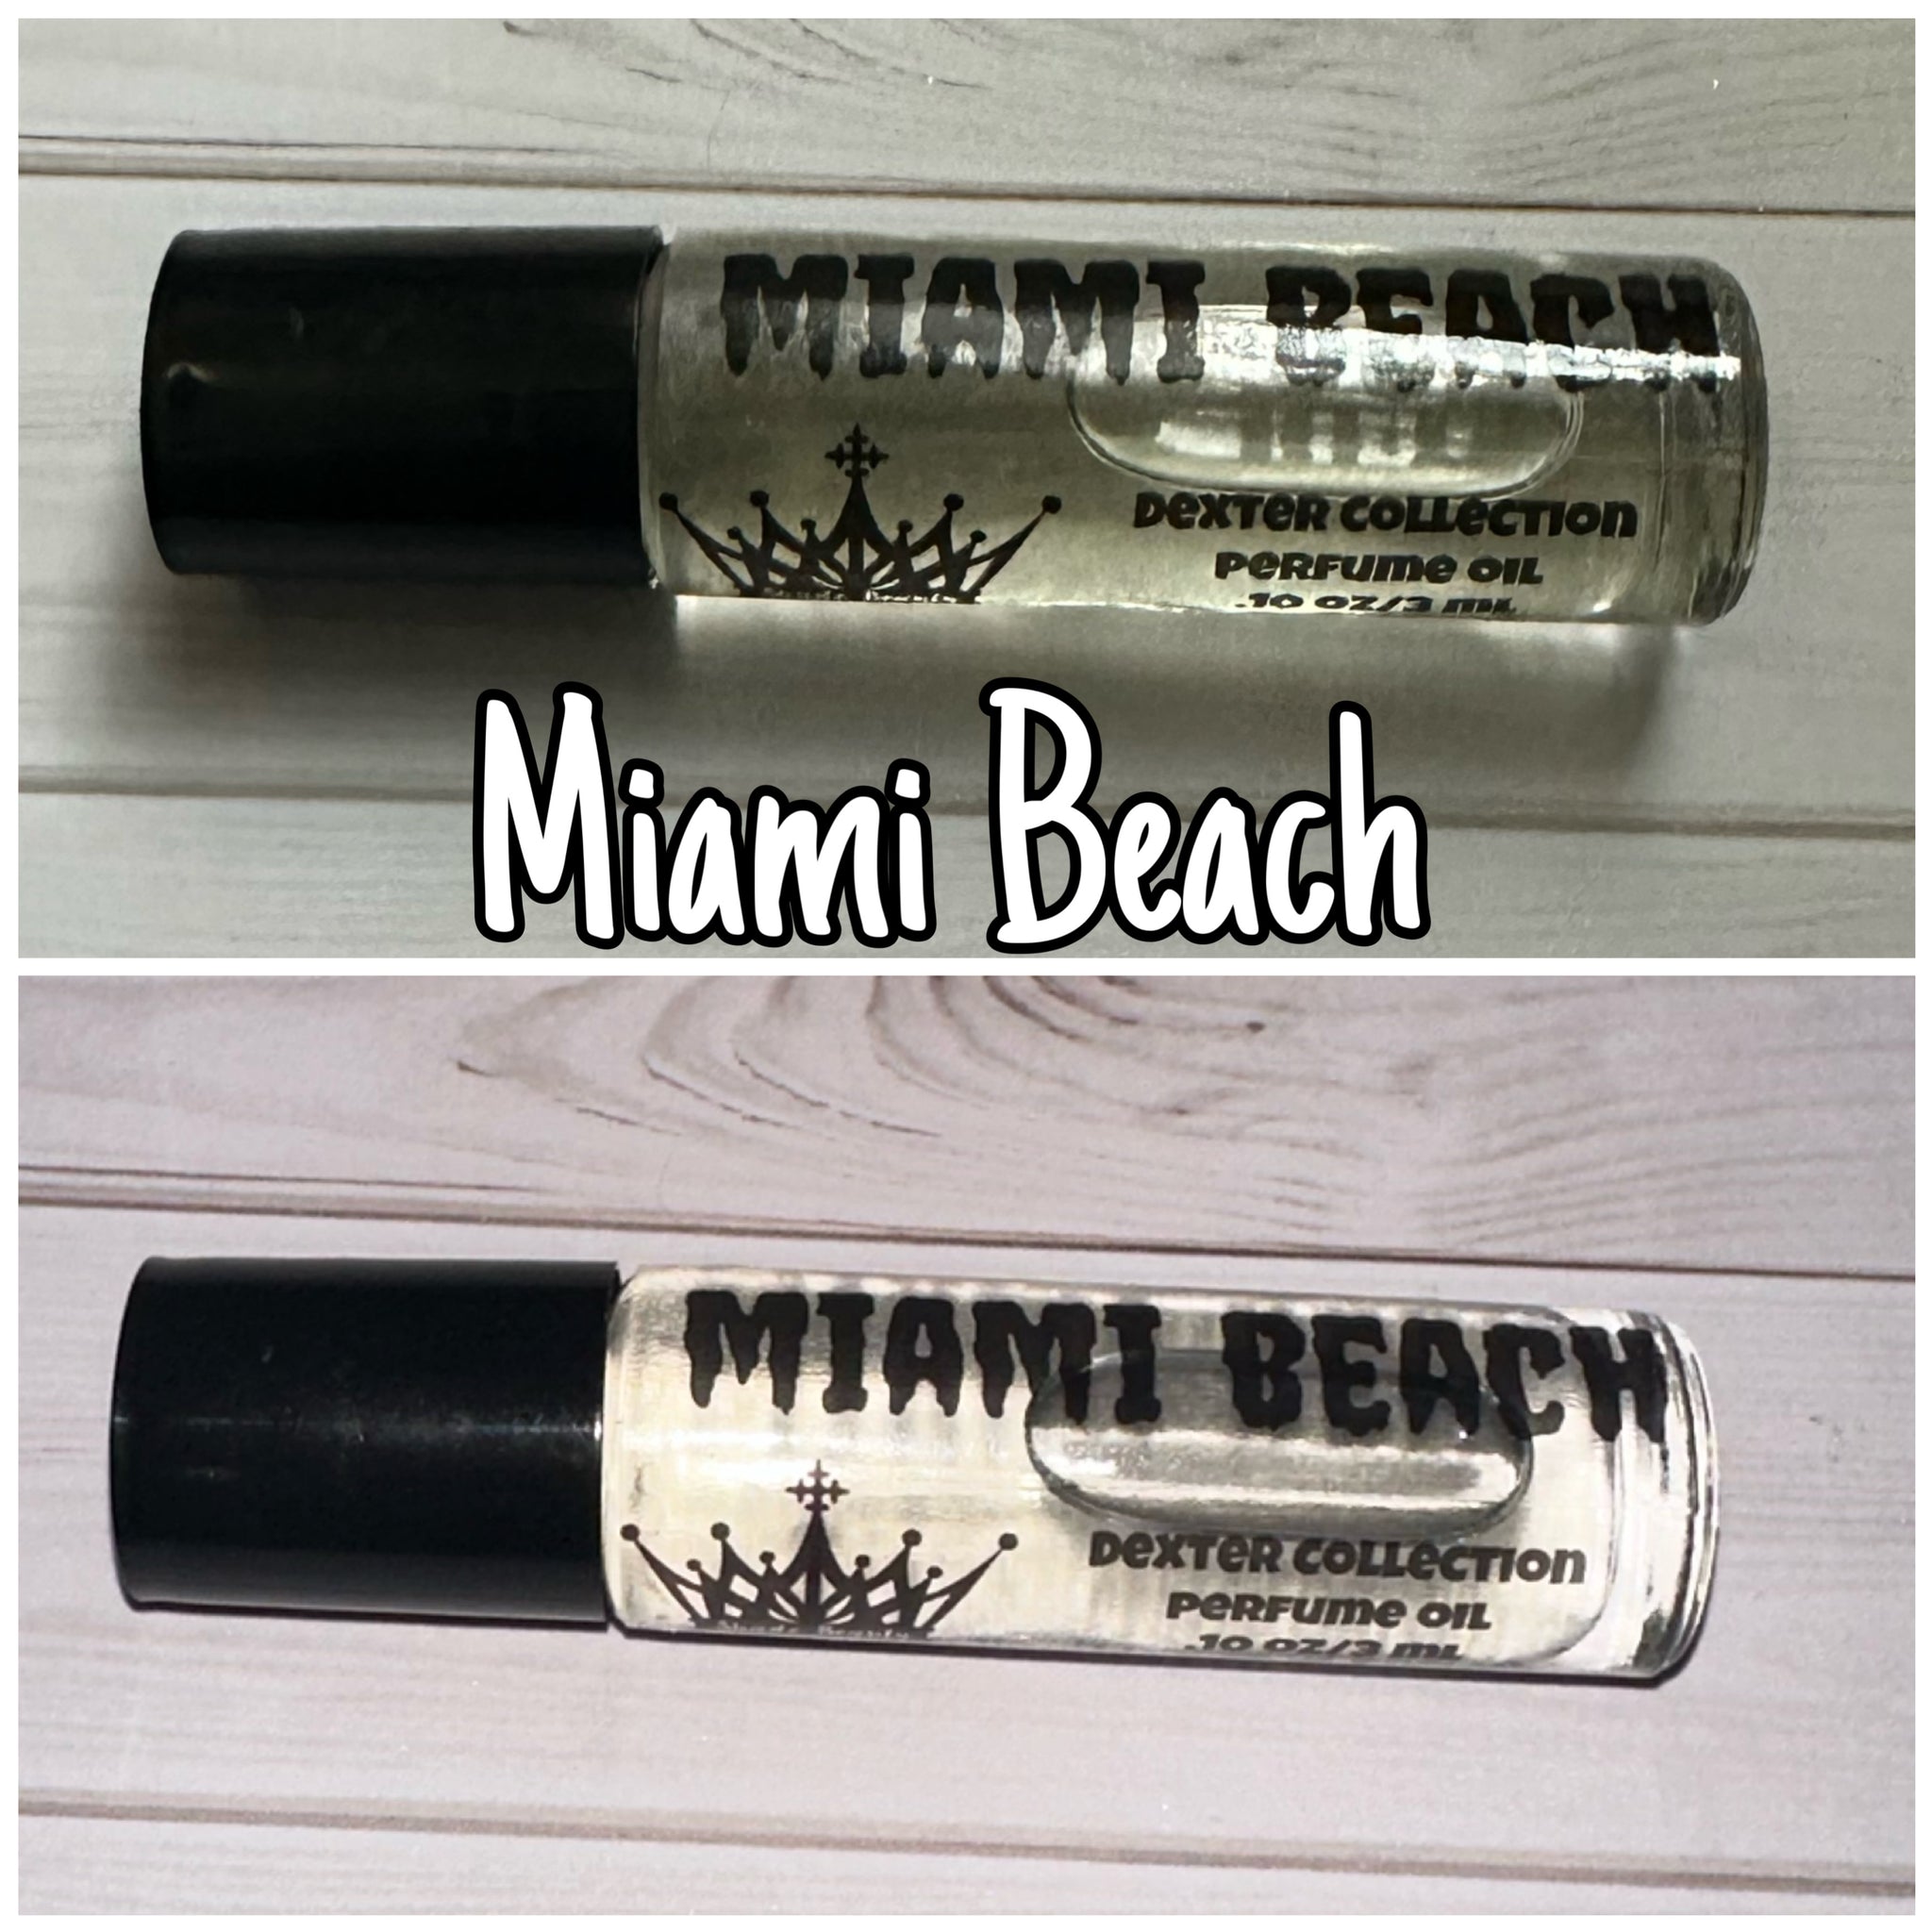 shade beauty, the dexter collection, dexter morgan, dexter morgan makeup collection, indie makeup, indie beauty, indie cosmetics, handmade makeup products, perfume oil, passion fruit, jasmine, sugared citrus, and exotic florals